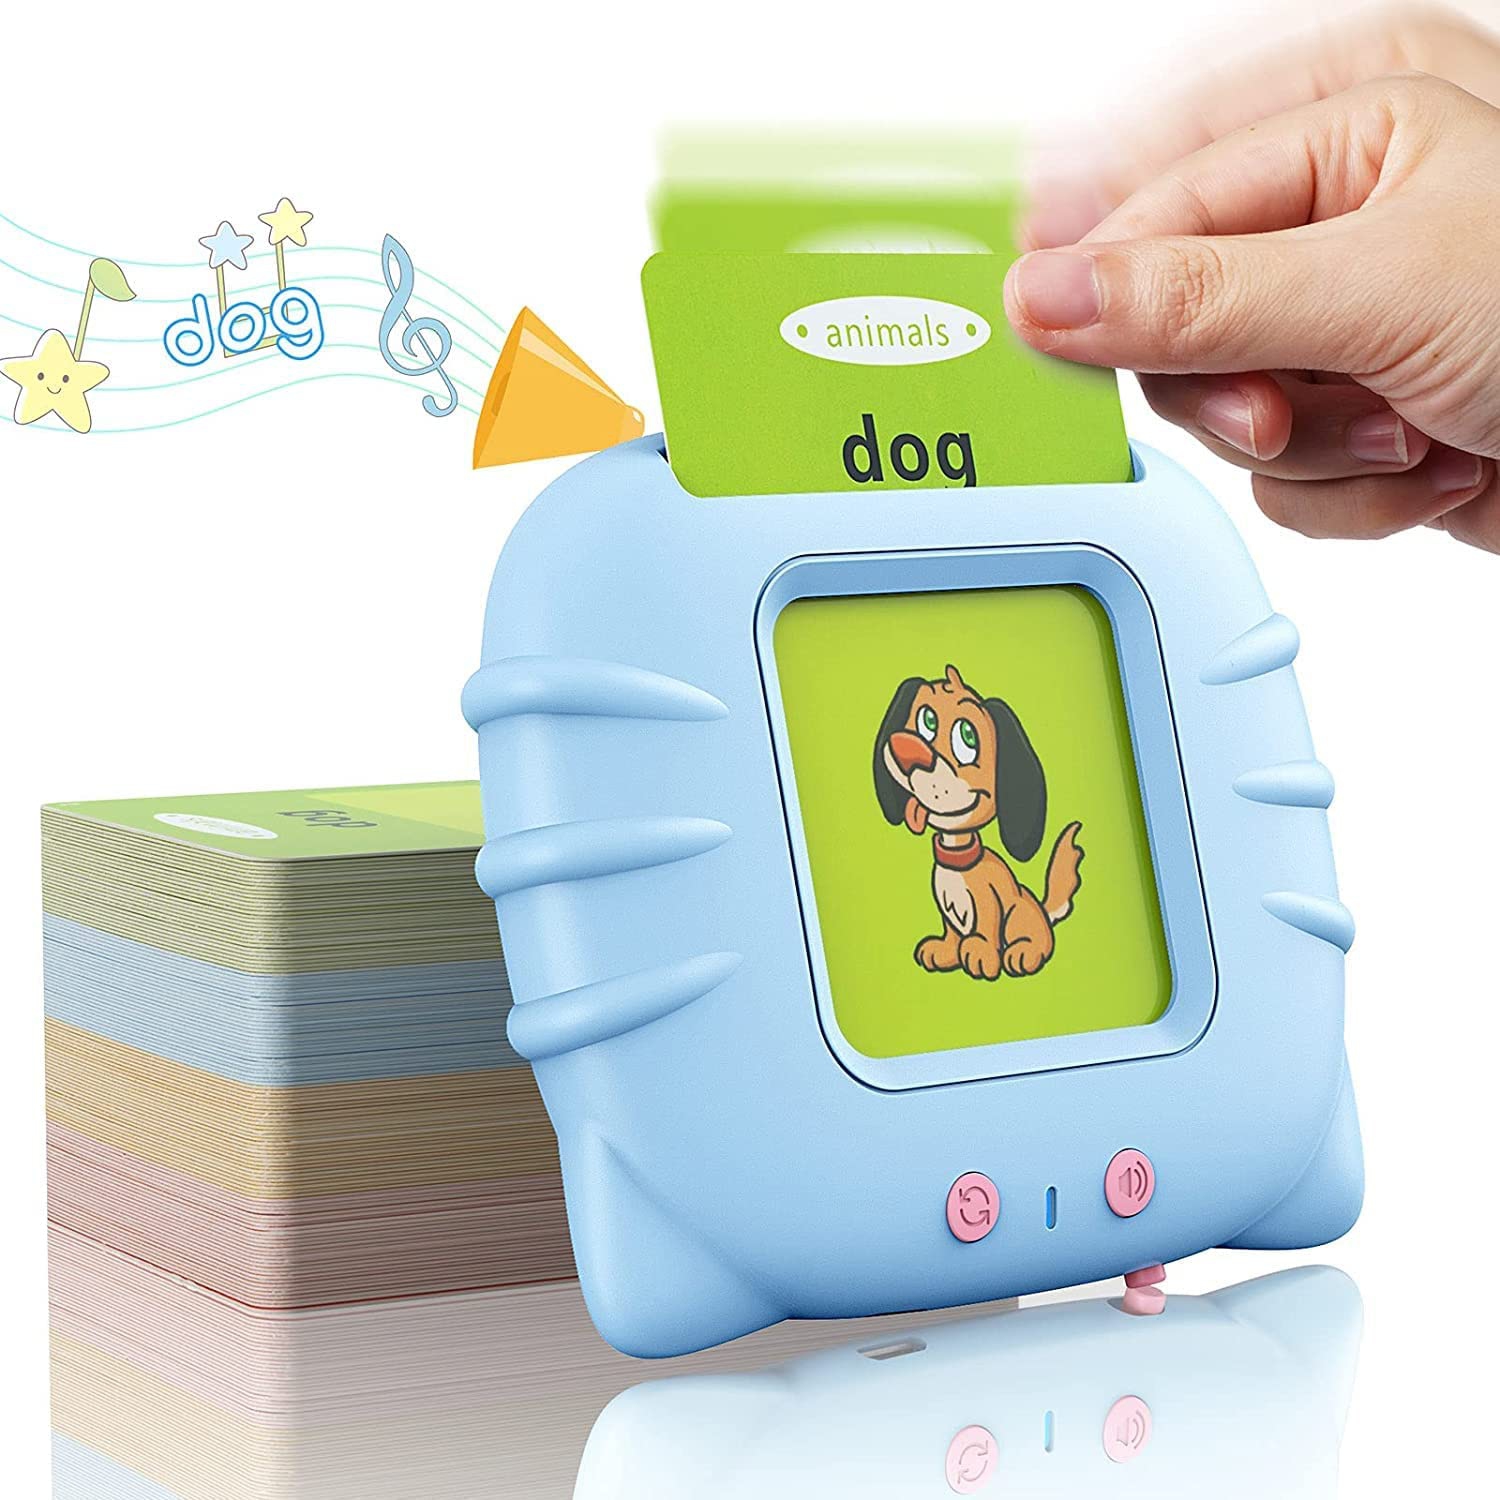 Flash Cards for Kids, Electronic Audible Machine Learning Toys